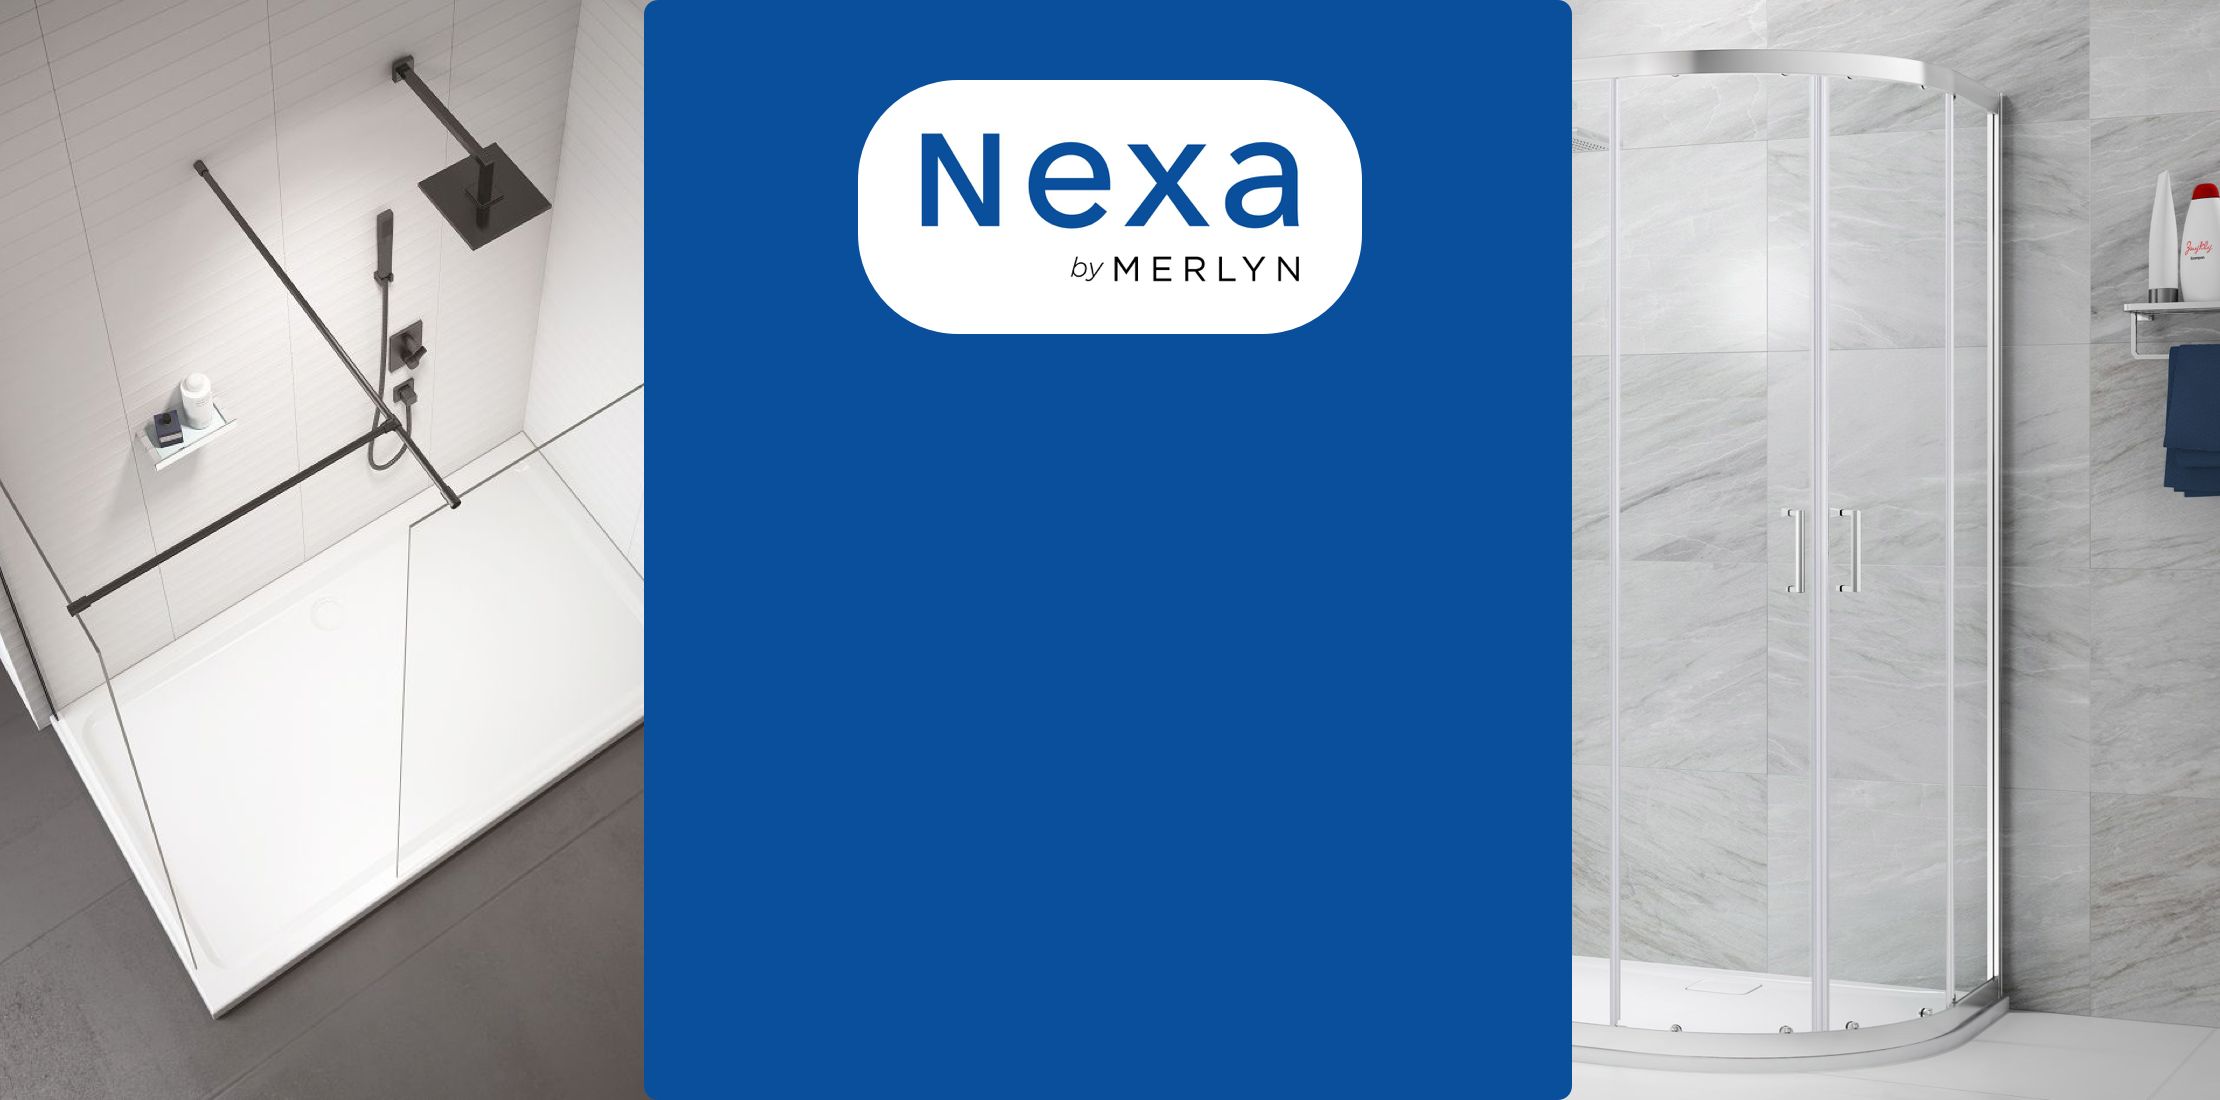 Nexa by MERLYN<br>Buying Guide